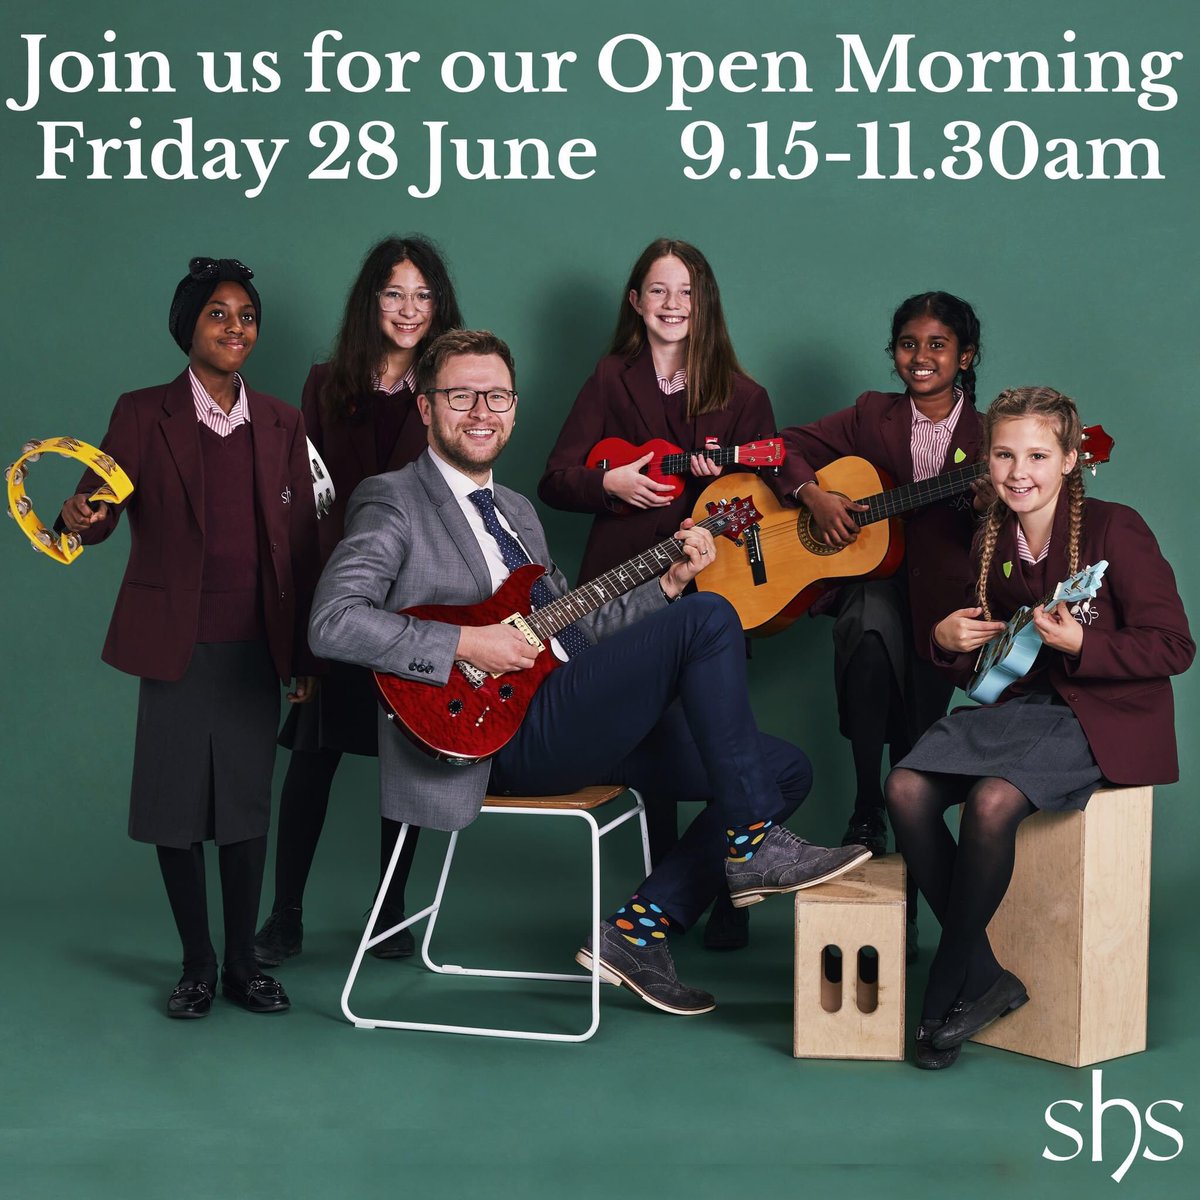 Our next Open Morning will be on Friday 28 June. Register online to come along: stroudhigh.gloucs.sch.uk/admissions/ope… #everythingispossible